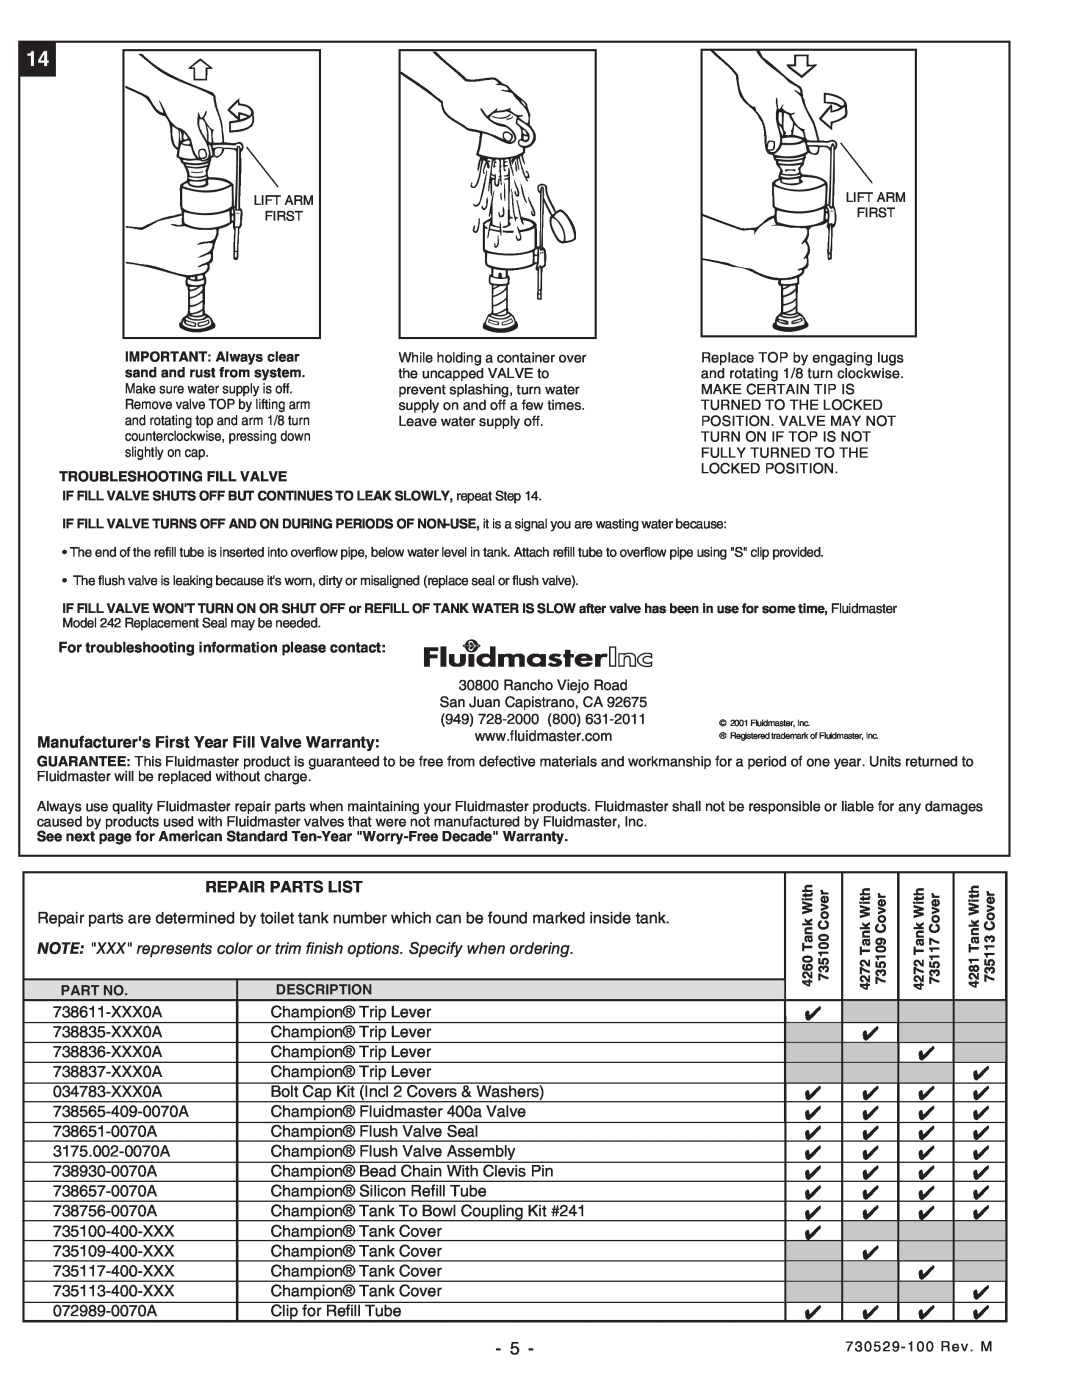 American Standard 2076, 2002 installation instructions Manufacturers First Year Fill Valve Warranty, Repair Parts List 